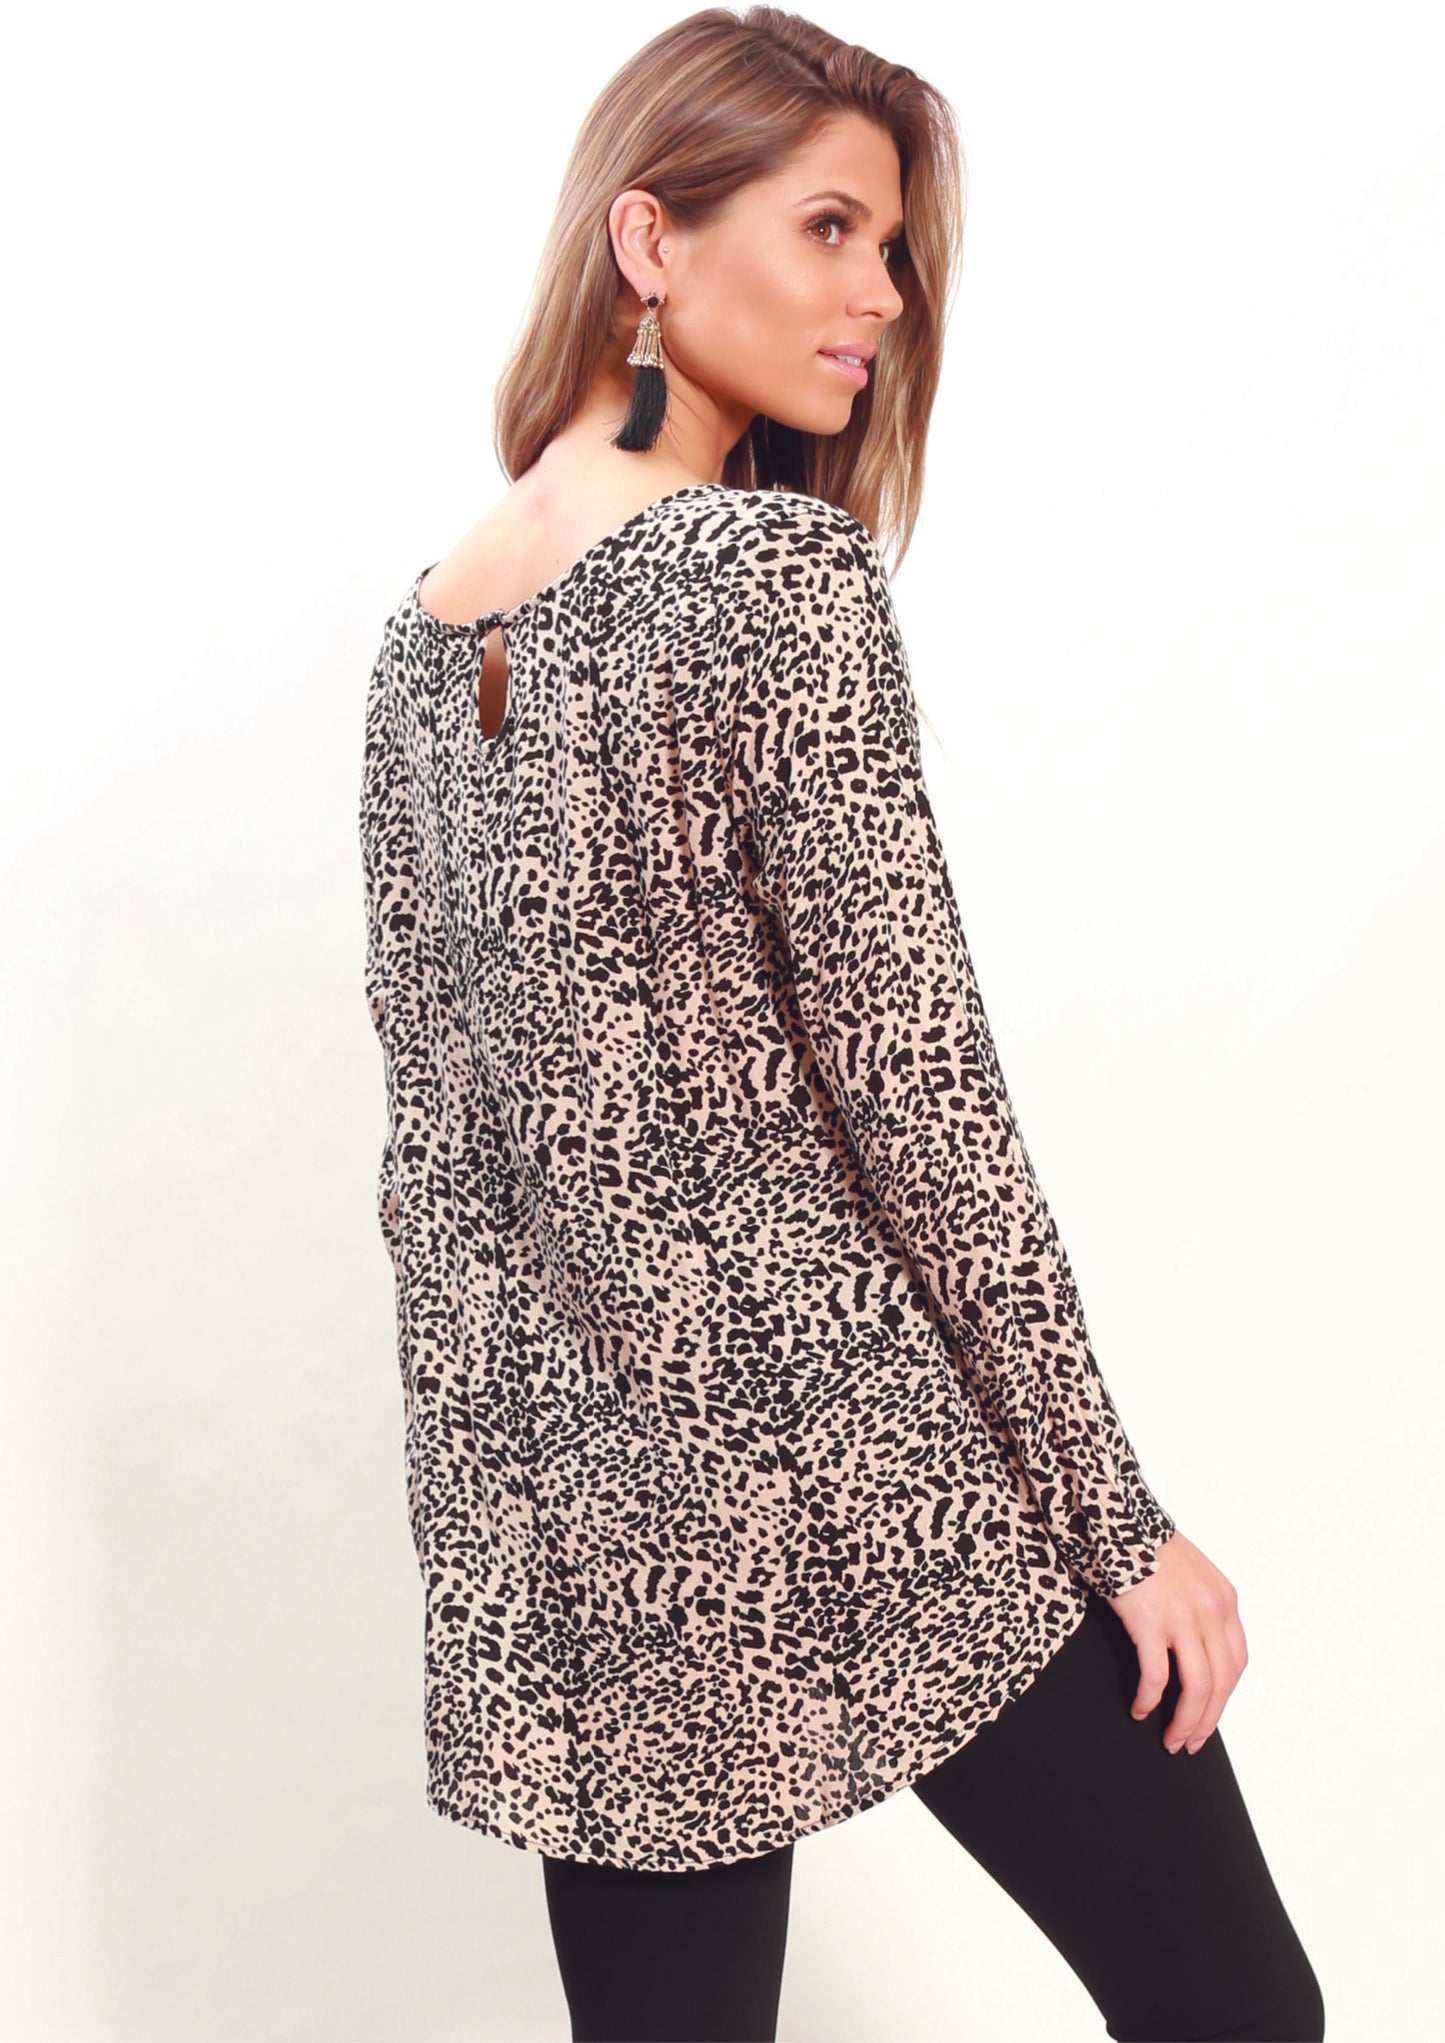 AY234SS Long Sleeve Leopard Print High Low Top (Pack)